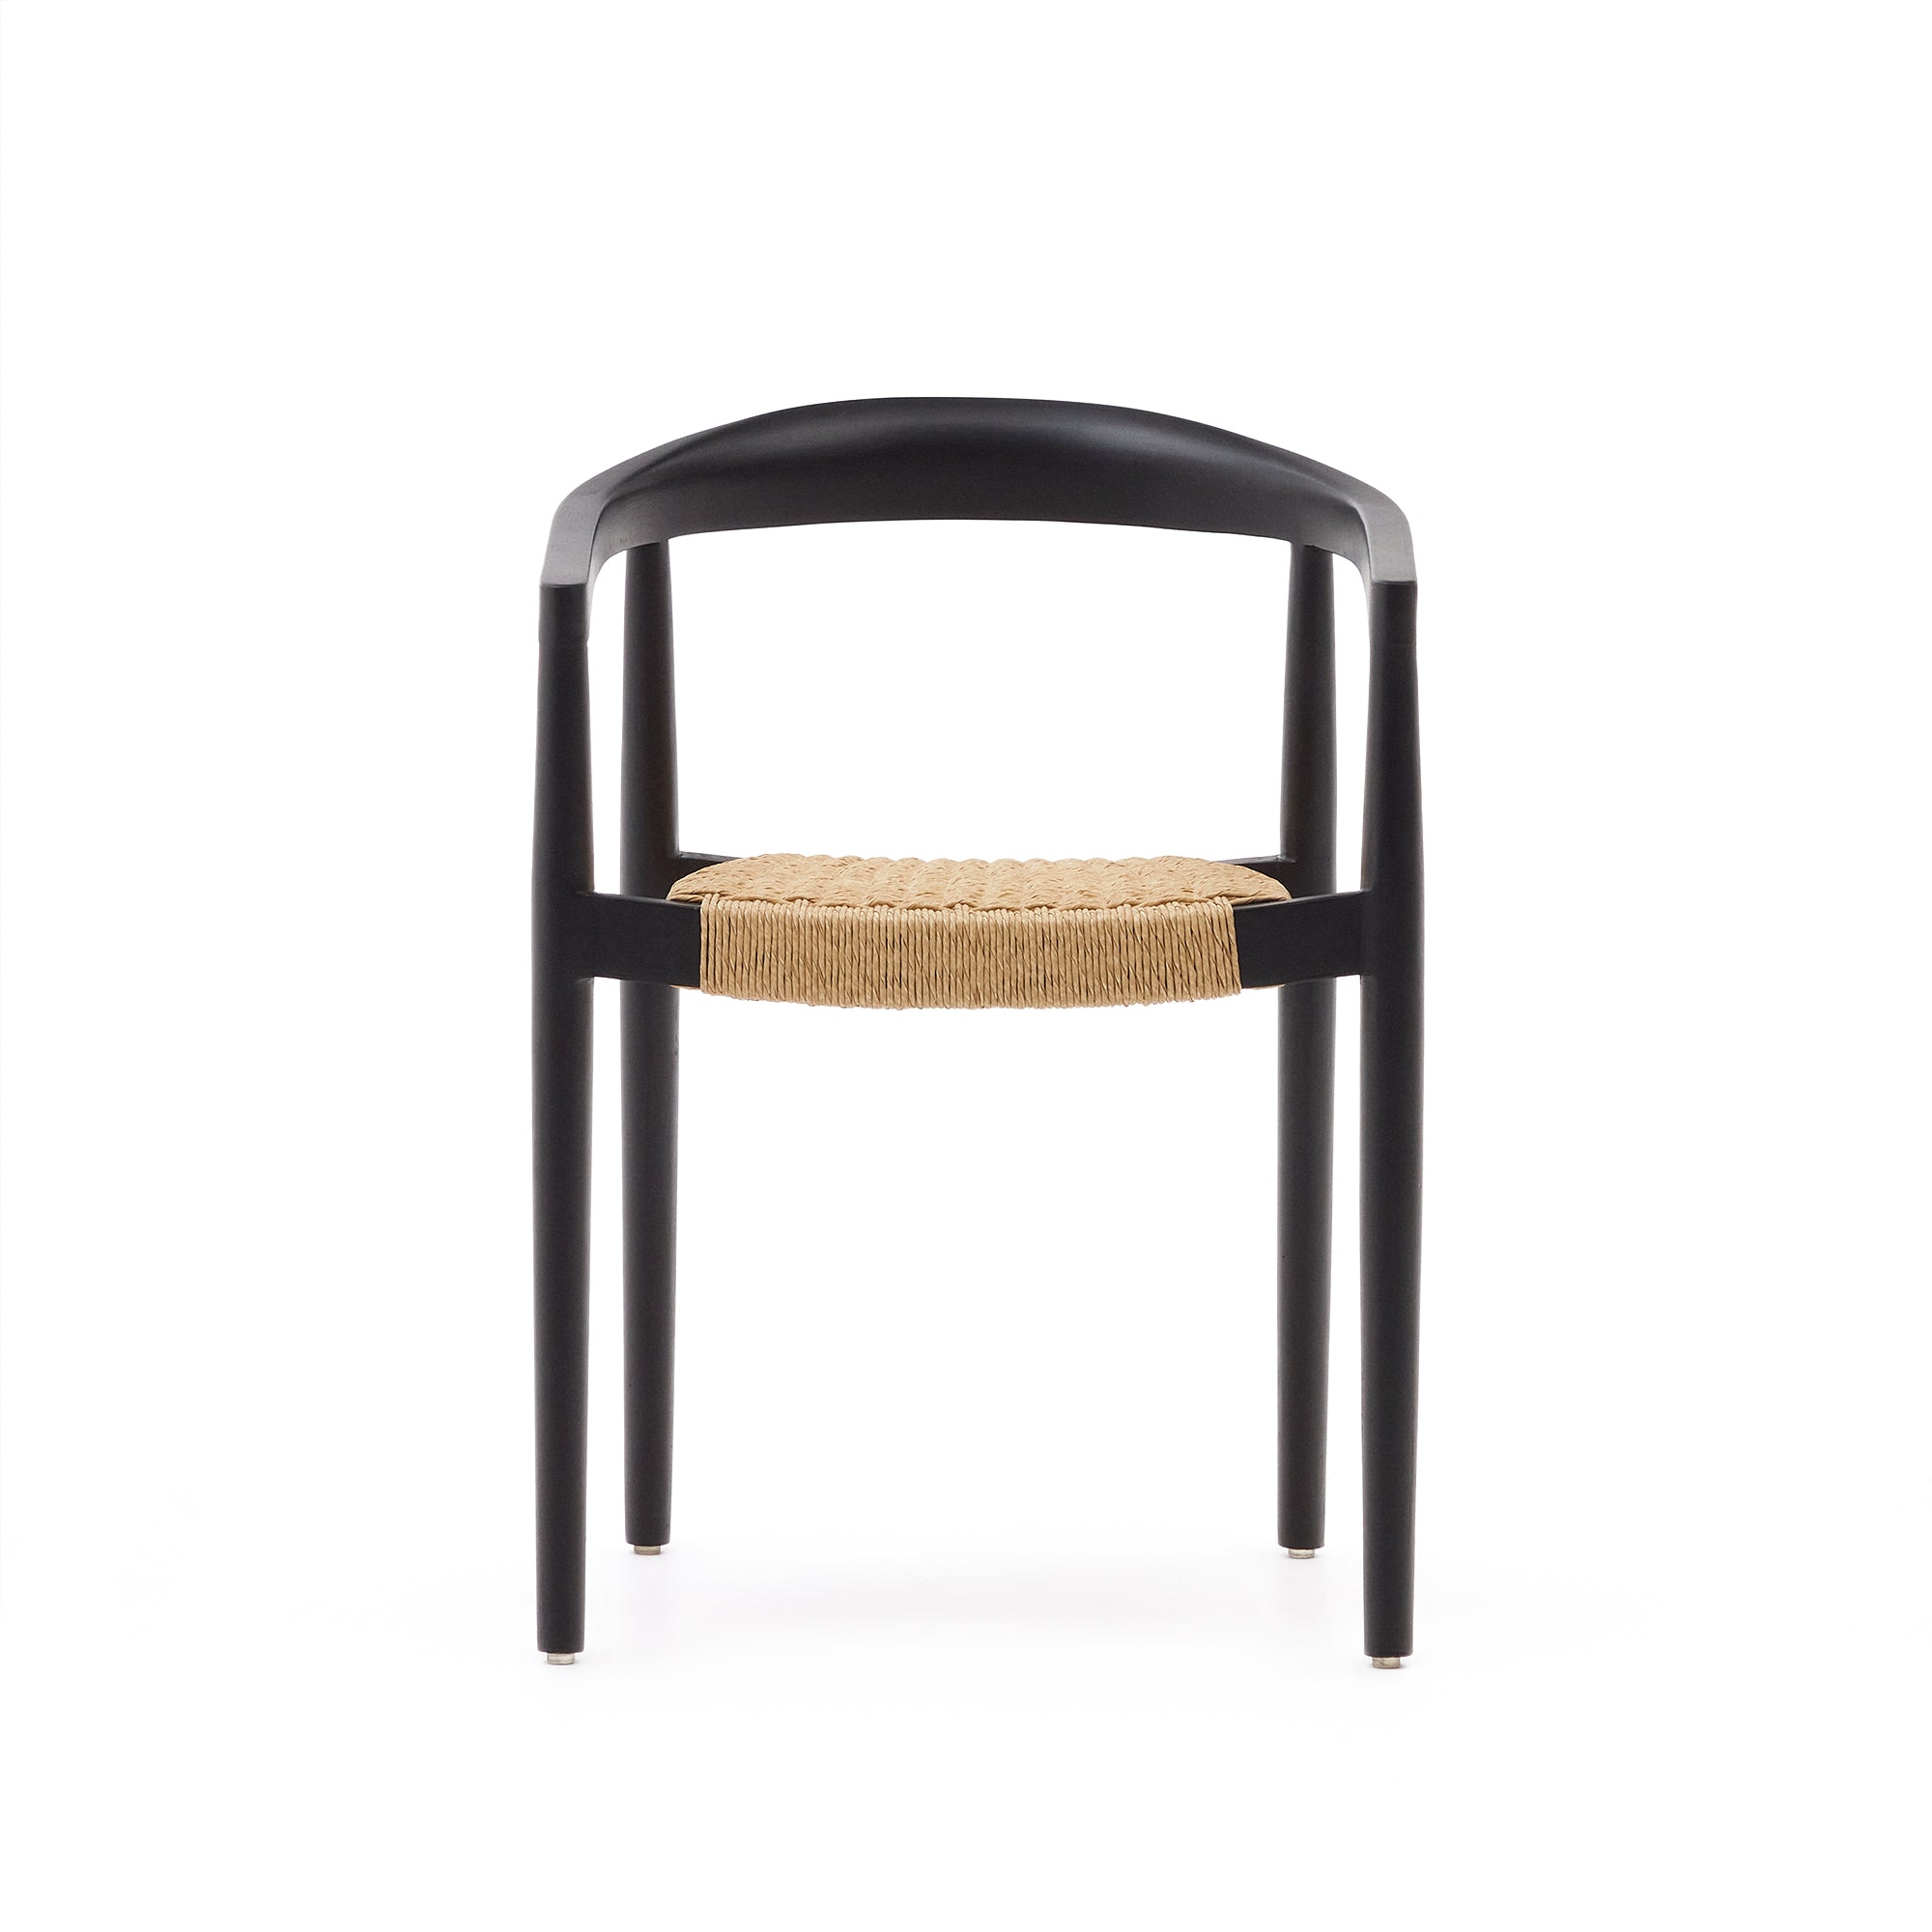 Ydalia stackable outdoor chair in solid teak wood with black finish and natural rope